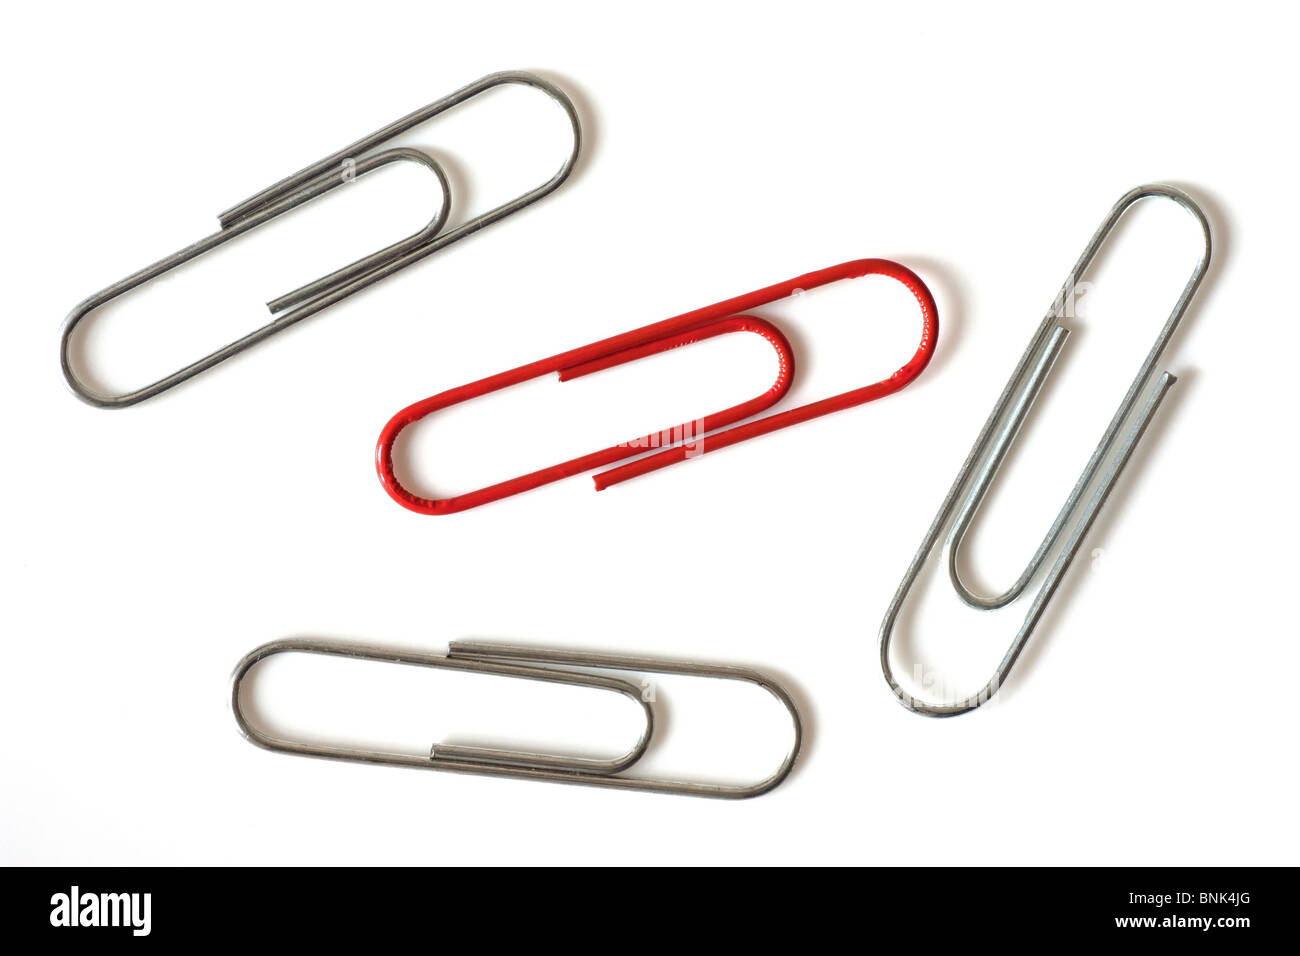 One red paper-clip amongst plain silver coloured paper-clips Stock Photo